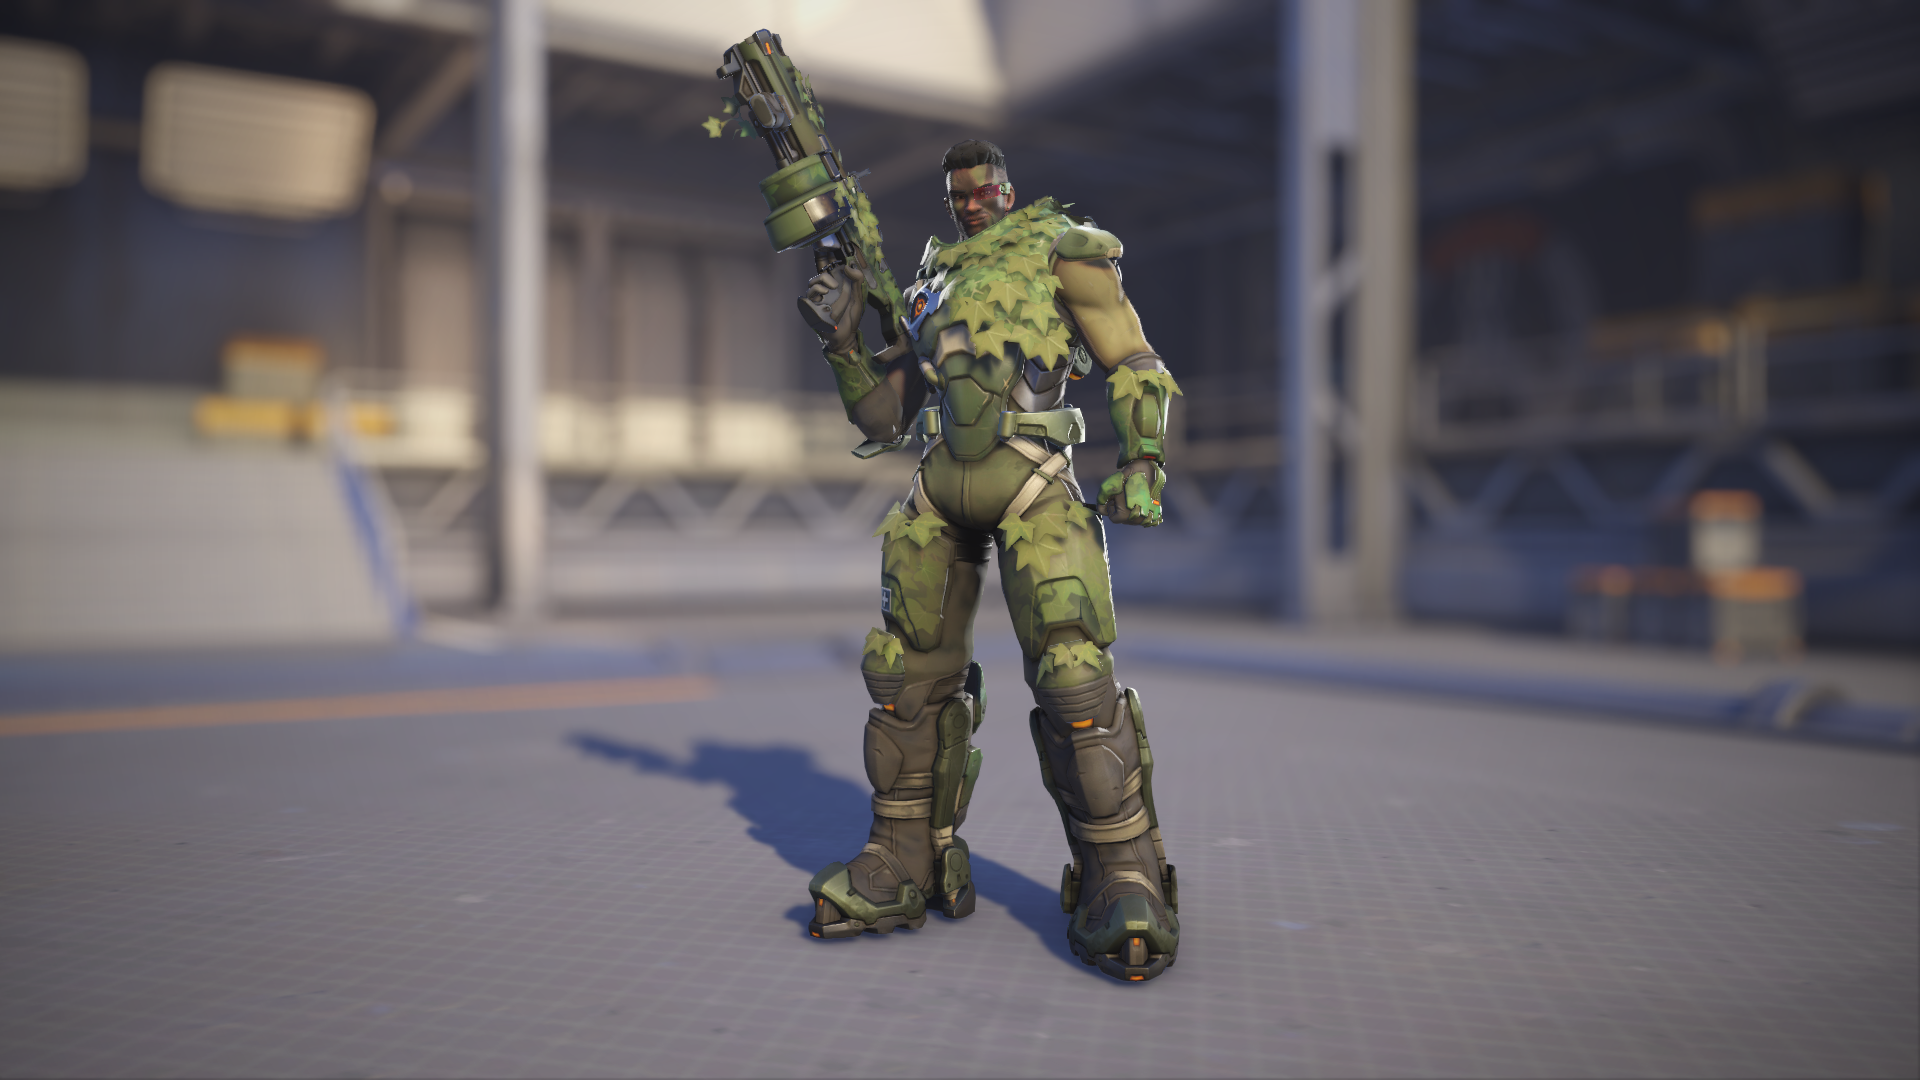 Baptiste models his Camouflage skin in Overwatch 2.